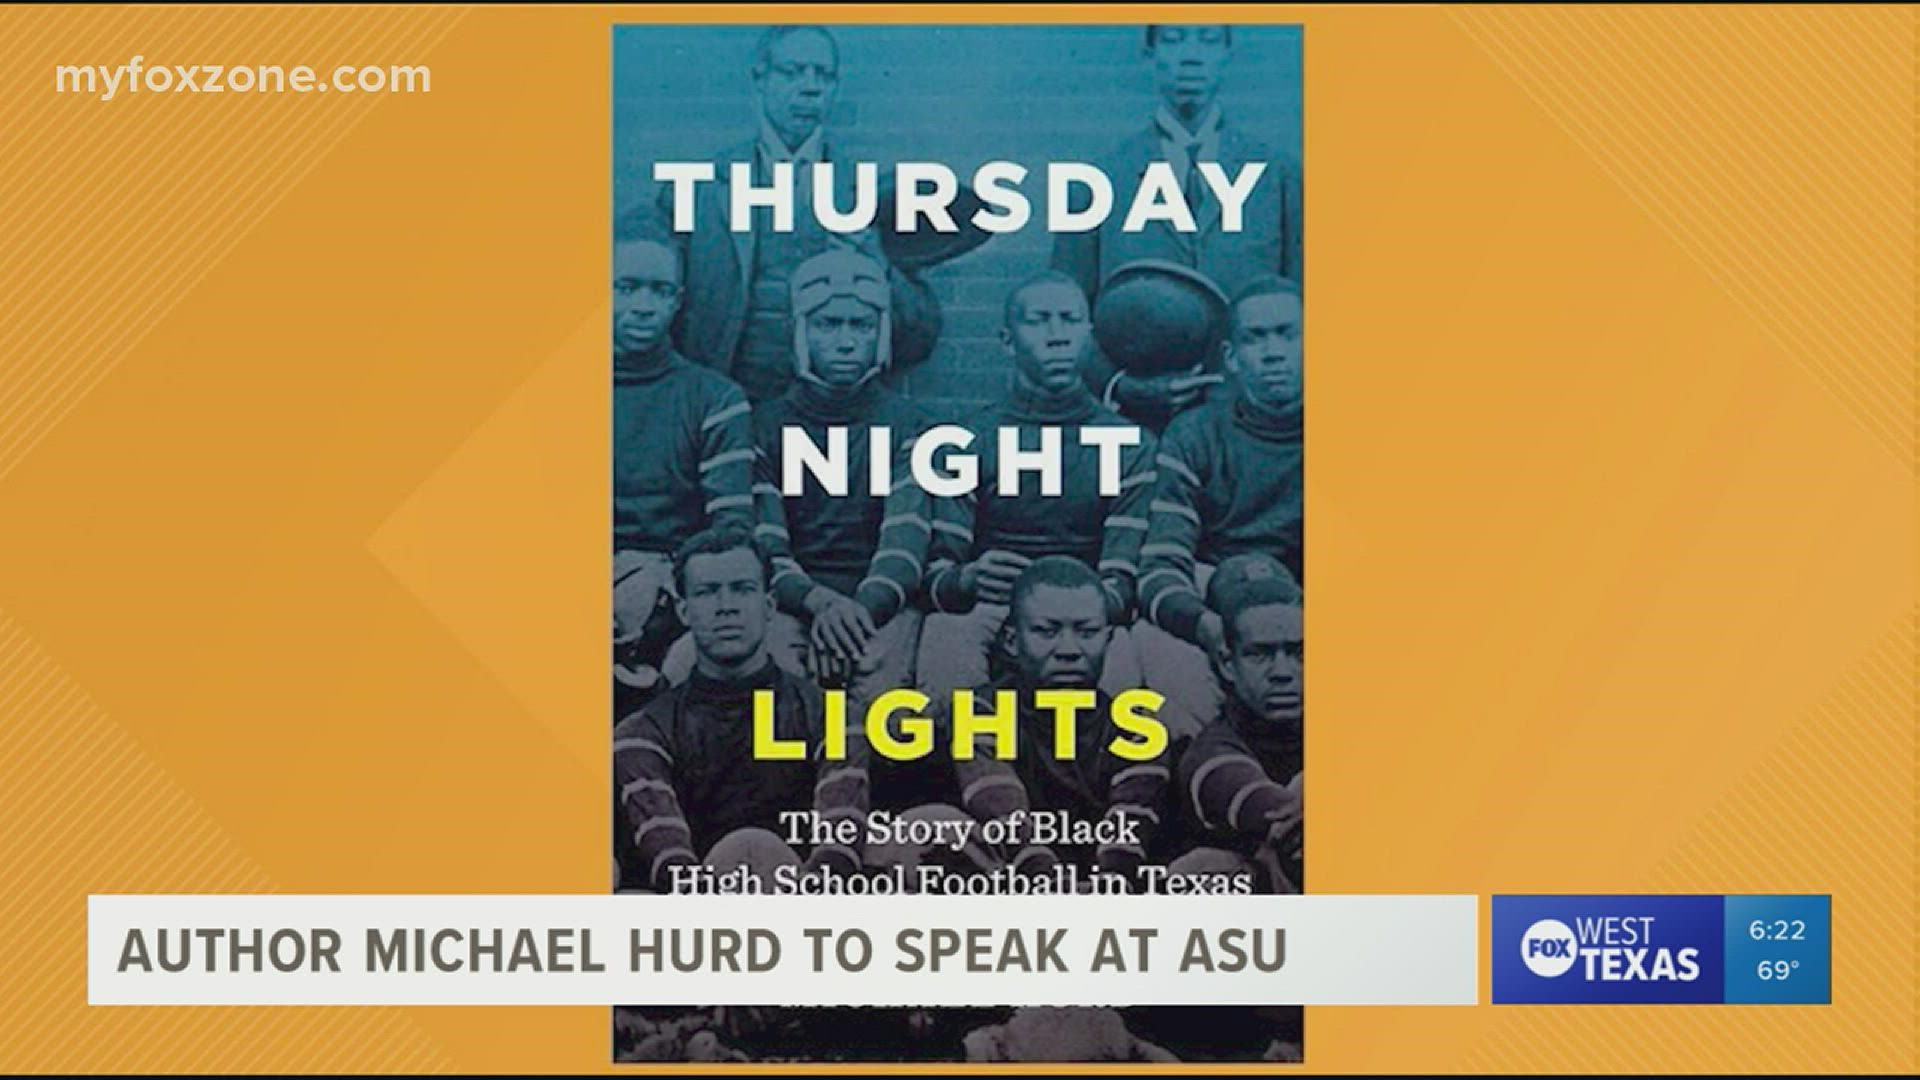 "An Evening with Michael Hurd" will begin at 7 p.m. Thursday in the University Center's C.J. Davidson Conference Center and is free and open the public.